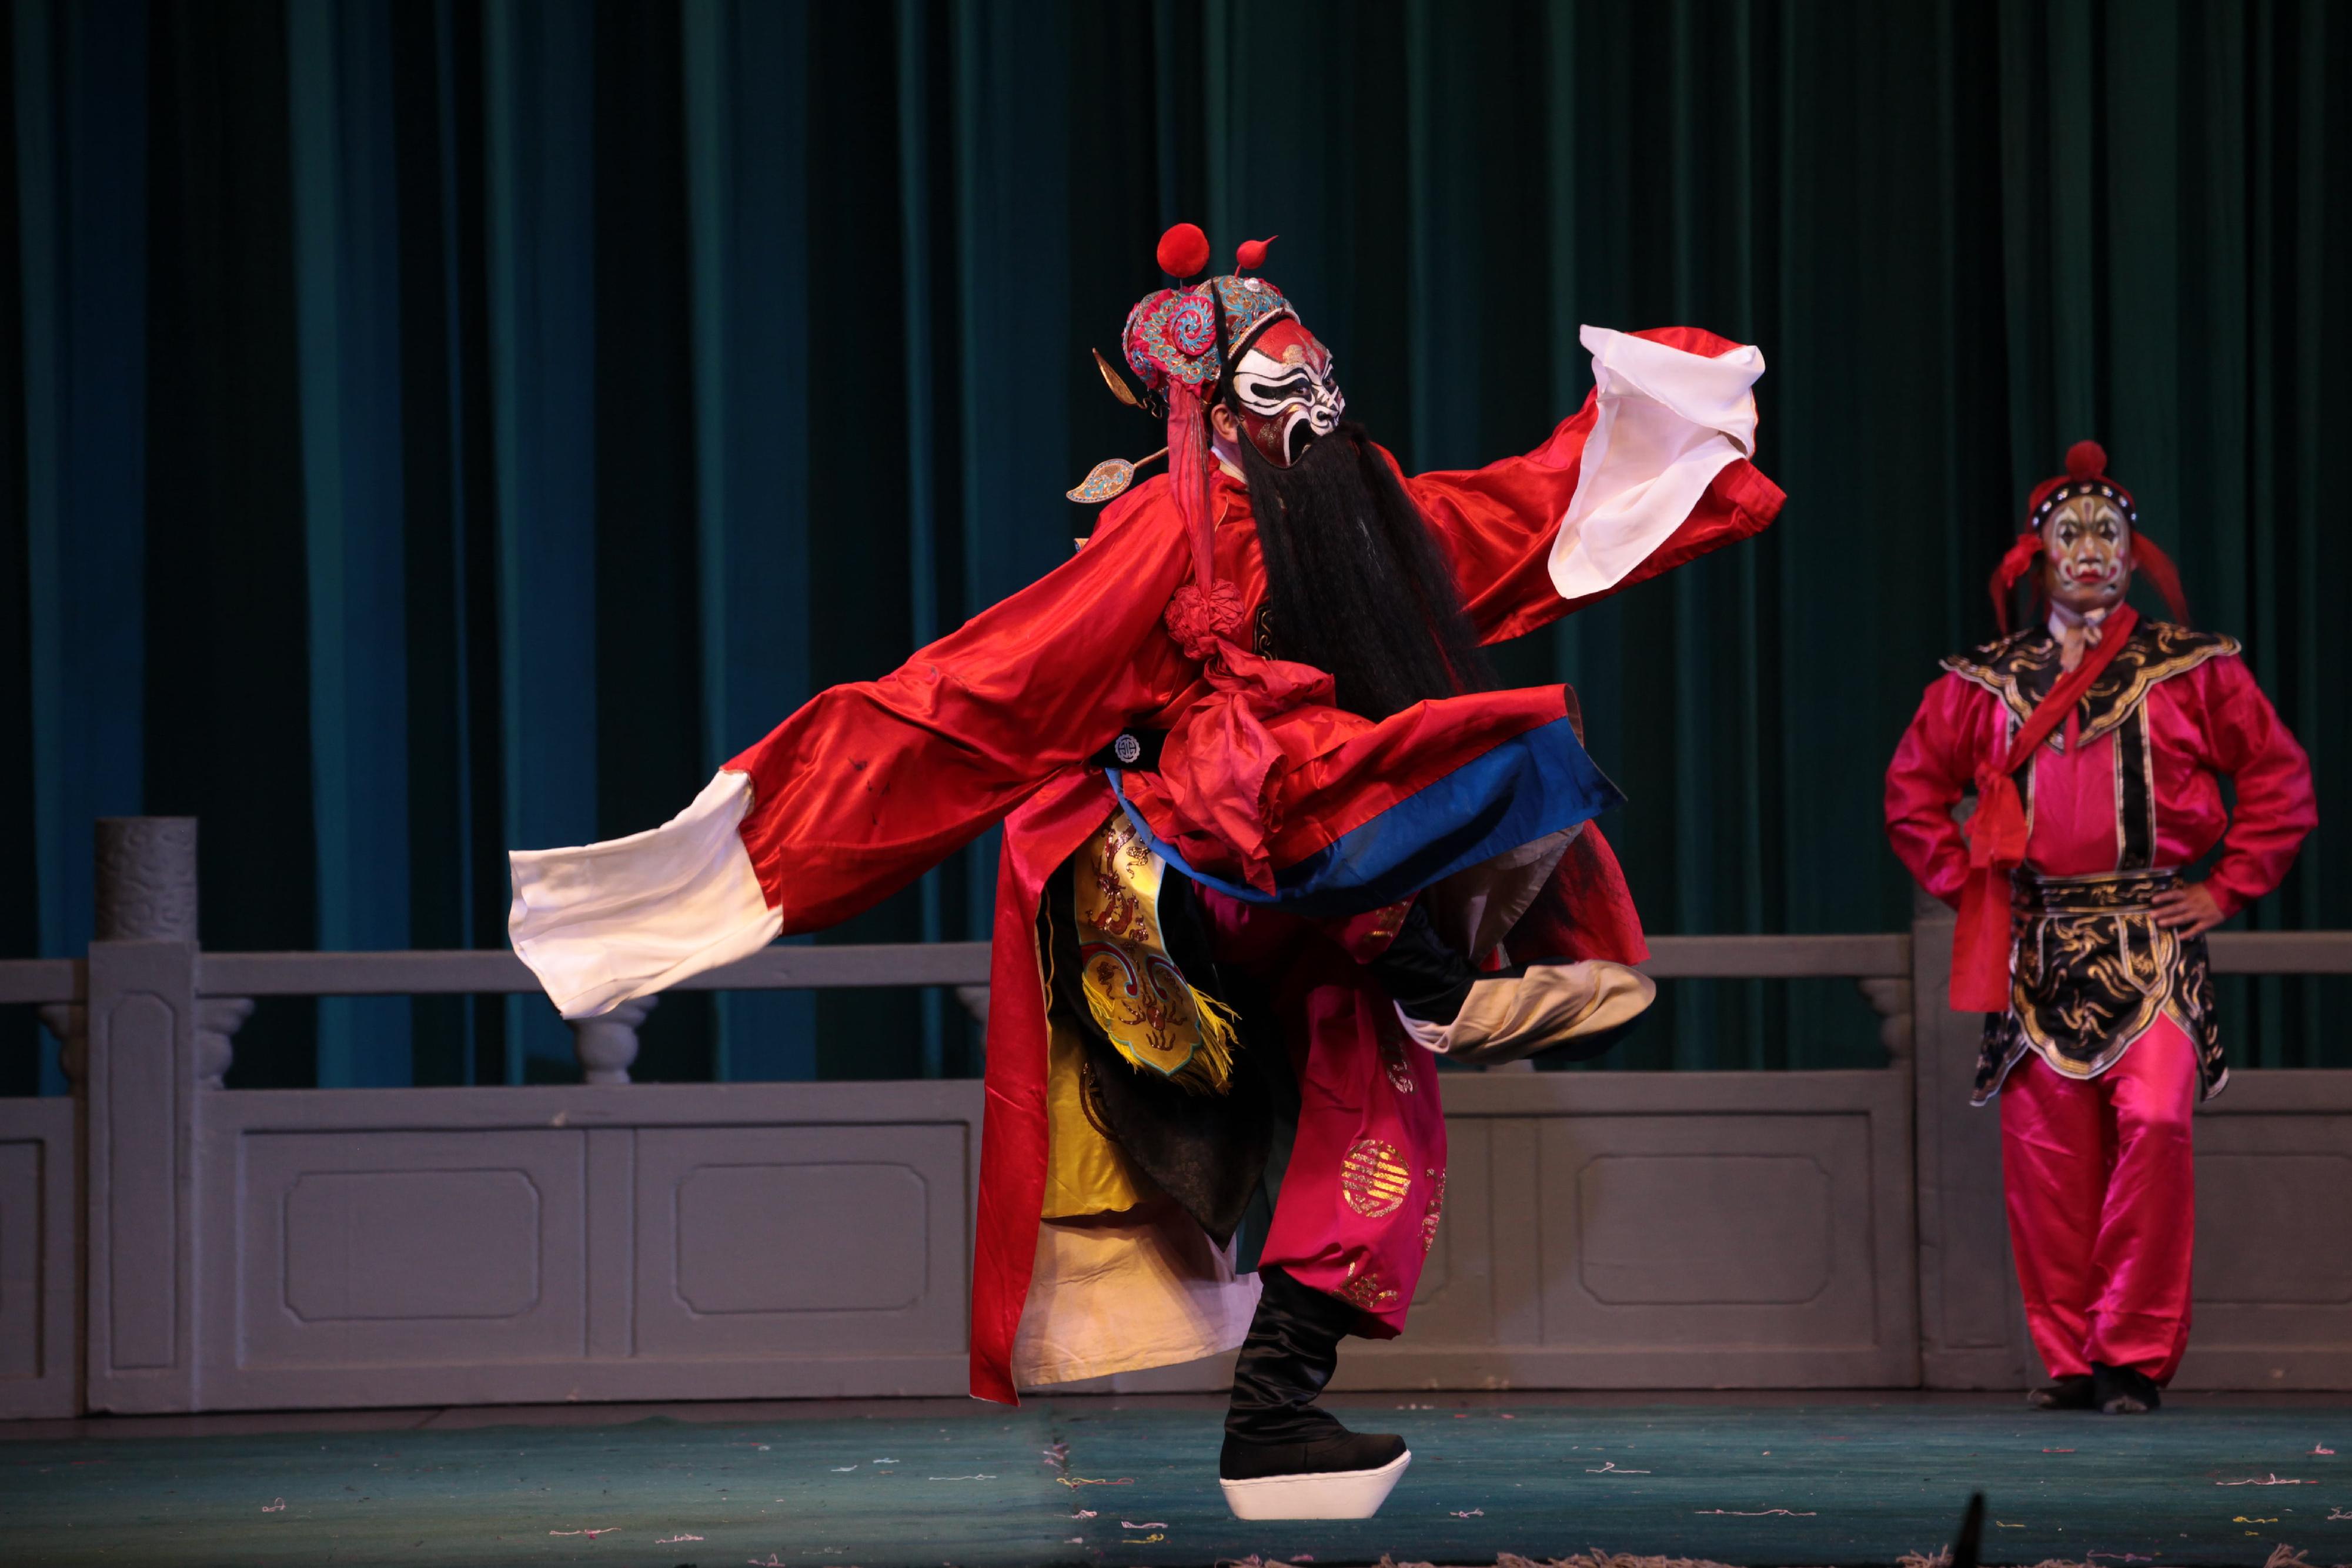 The inaugural Chinese Culture Festival will stage three classic Northern Kunqu opera plays in July. Photo shows a scene from the performance "Zhong Kui Marrying His Younger Sister Off" from "Tian Xia Le - The Story of Zhong Kui and Du Ping".
